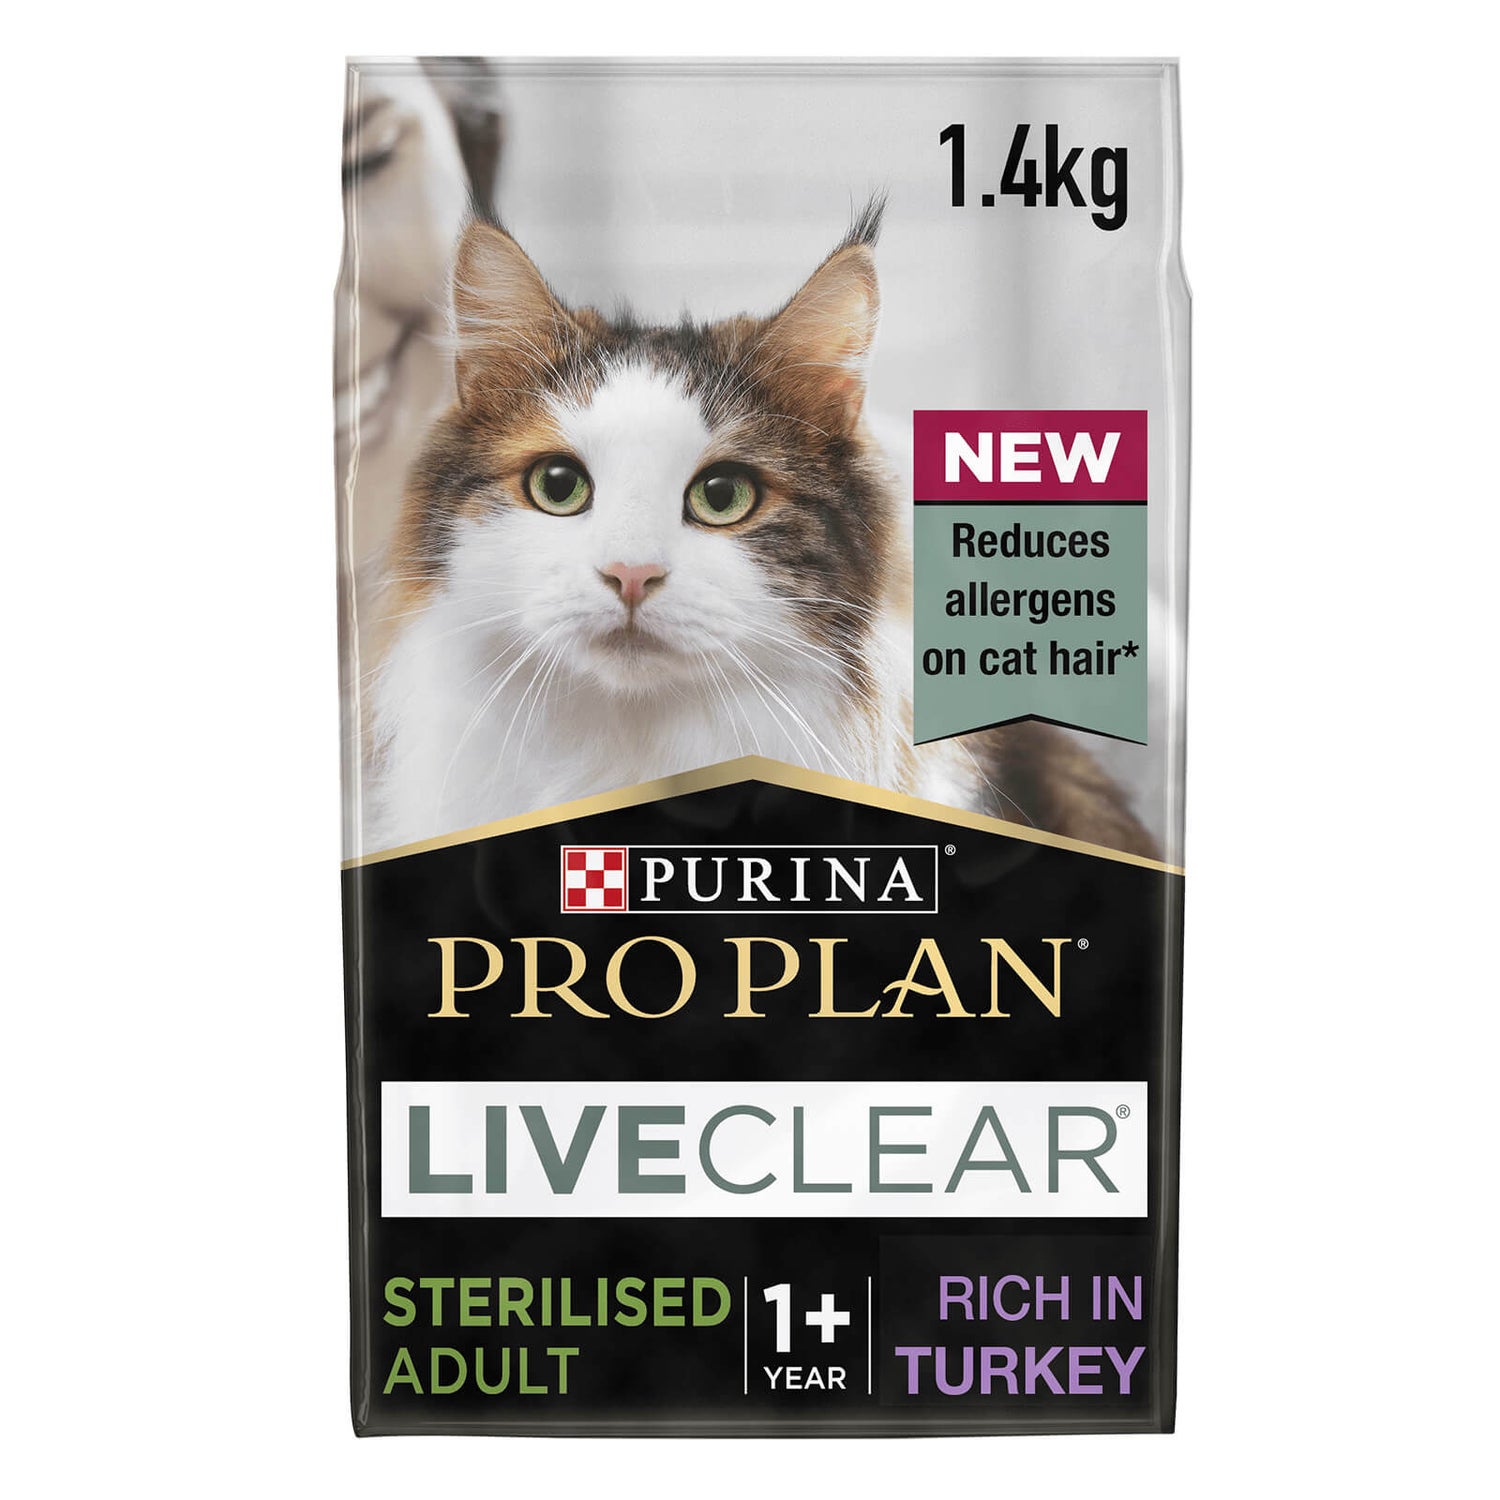 PRO PLAN LiveClear Cat-Allergen Reducing Sterilised Adult Dry Cat Food with Turkey 1.4kg